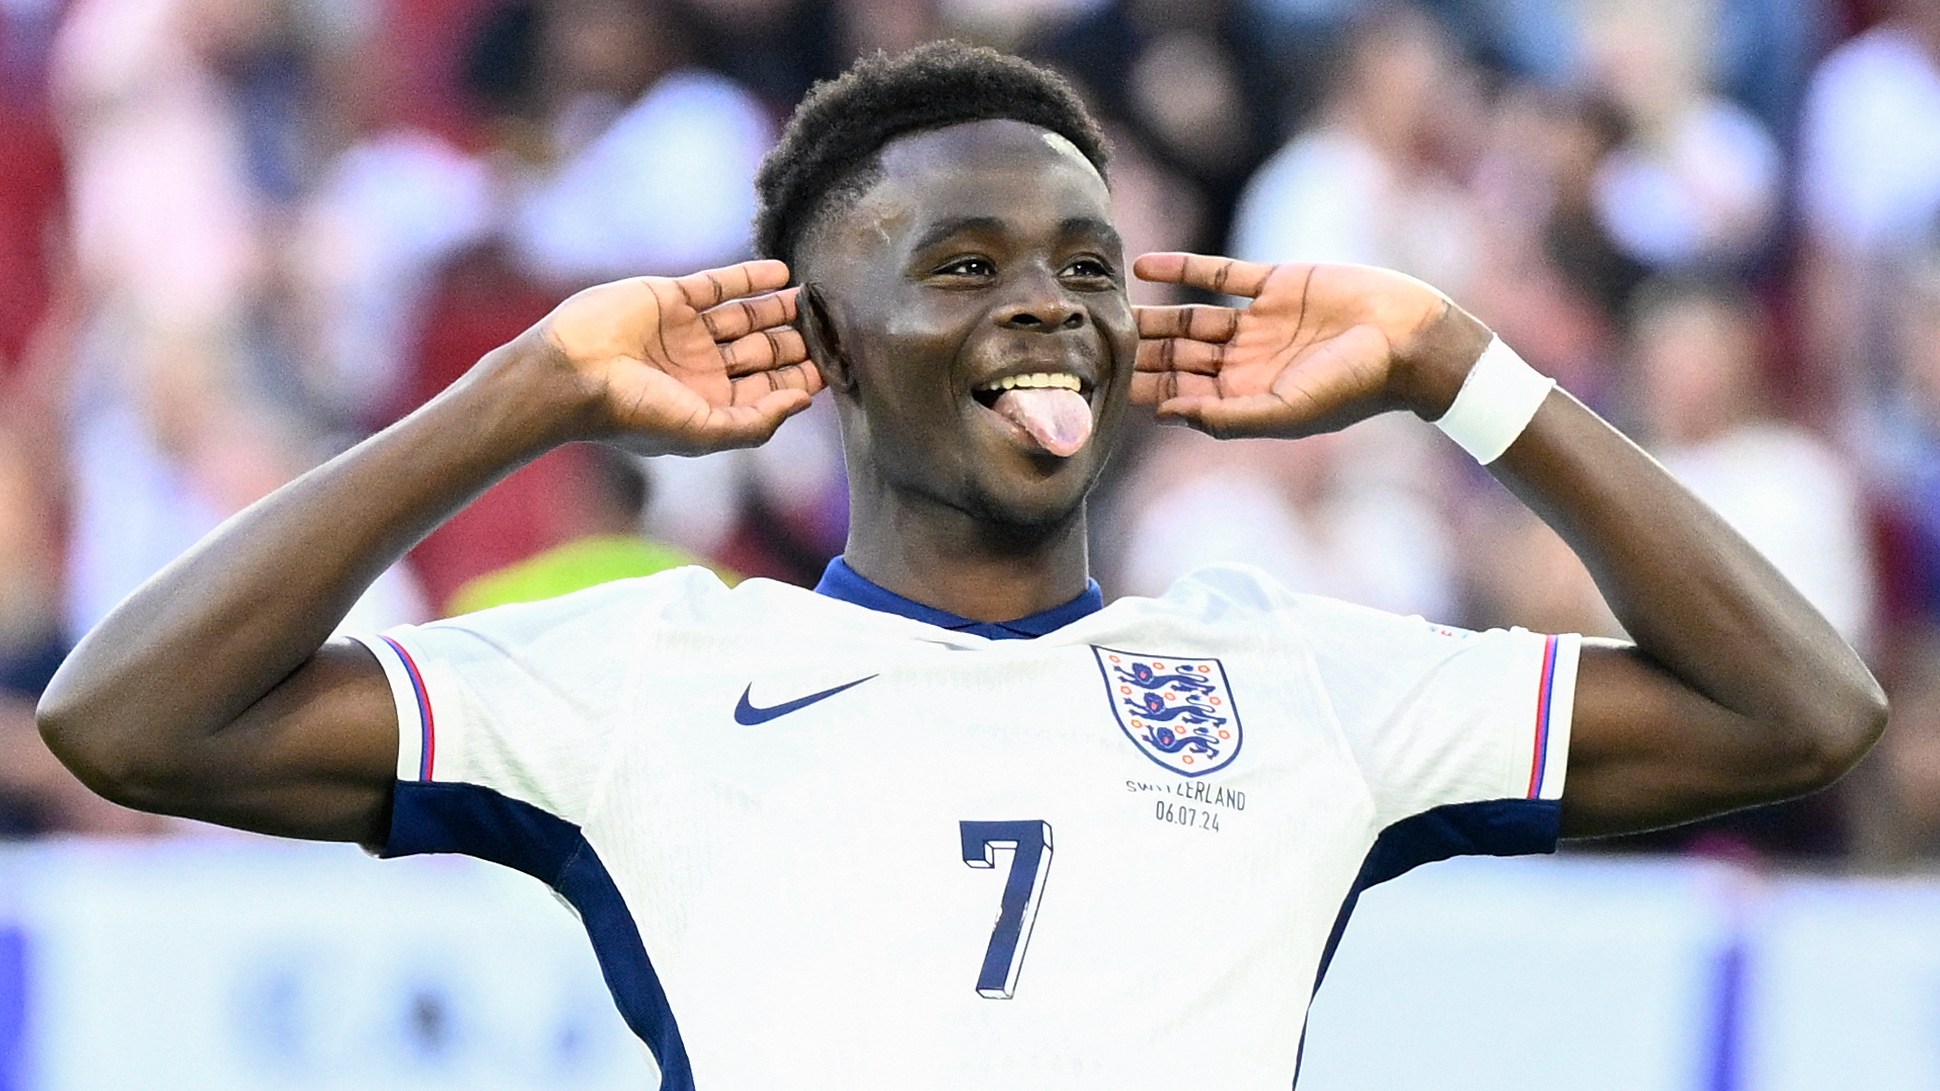 England reach semi-finals after shoot-out drama and Saka’s nerves of steel